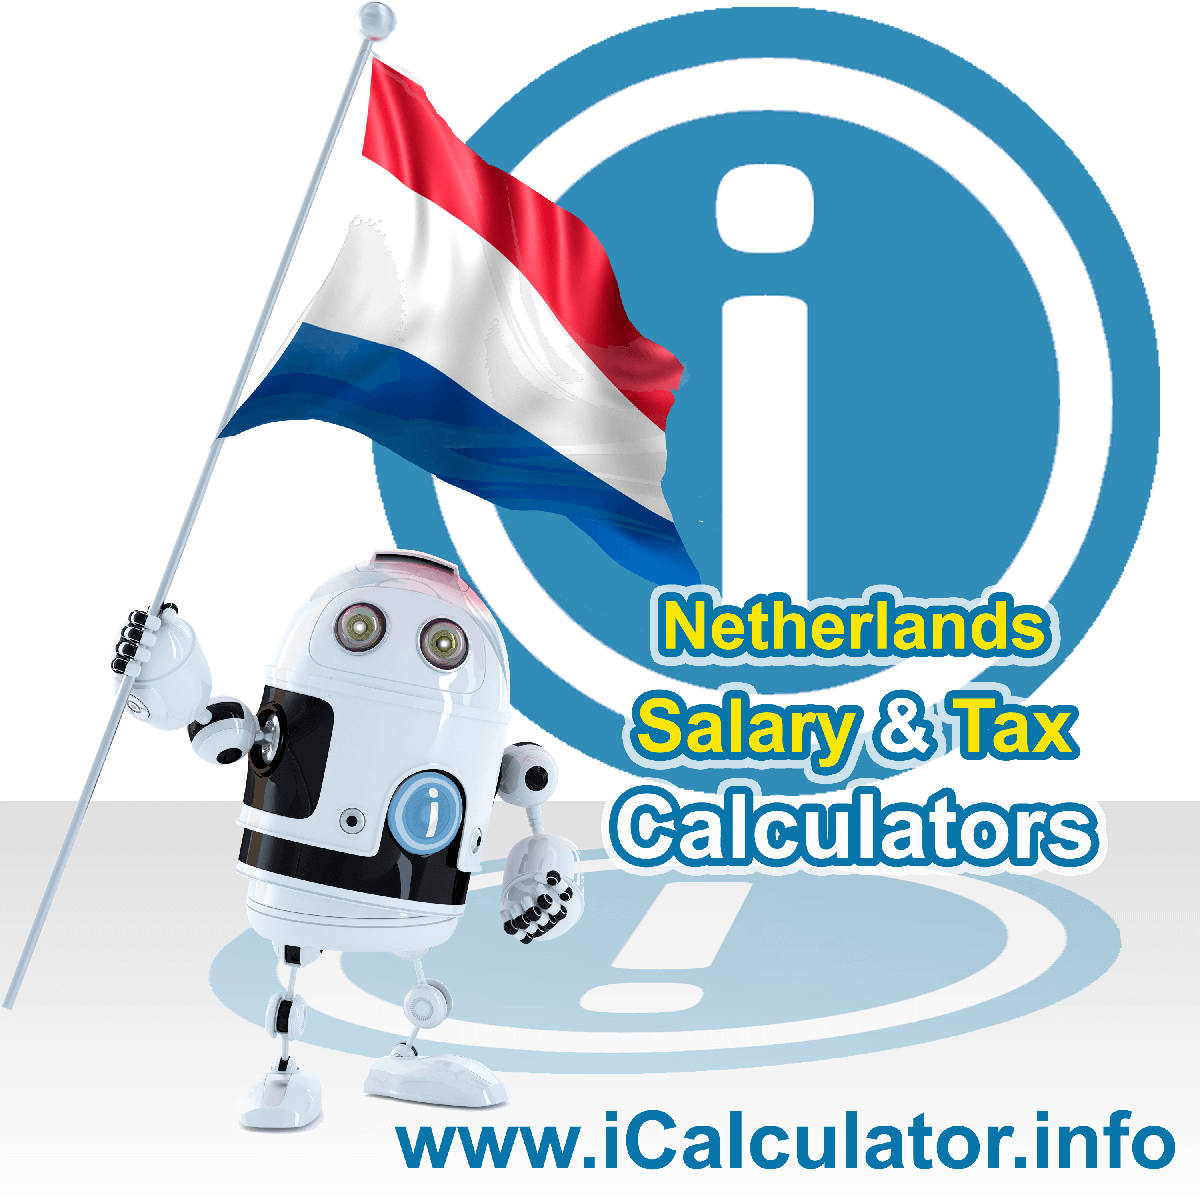 Netherlands Salary Calculator. This image shows the Netherlands flag and information relating to the tax formula for the Netherlands Tax Calculator